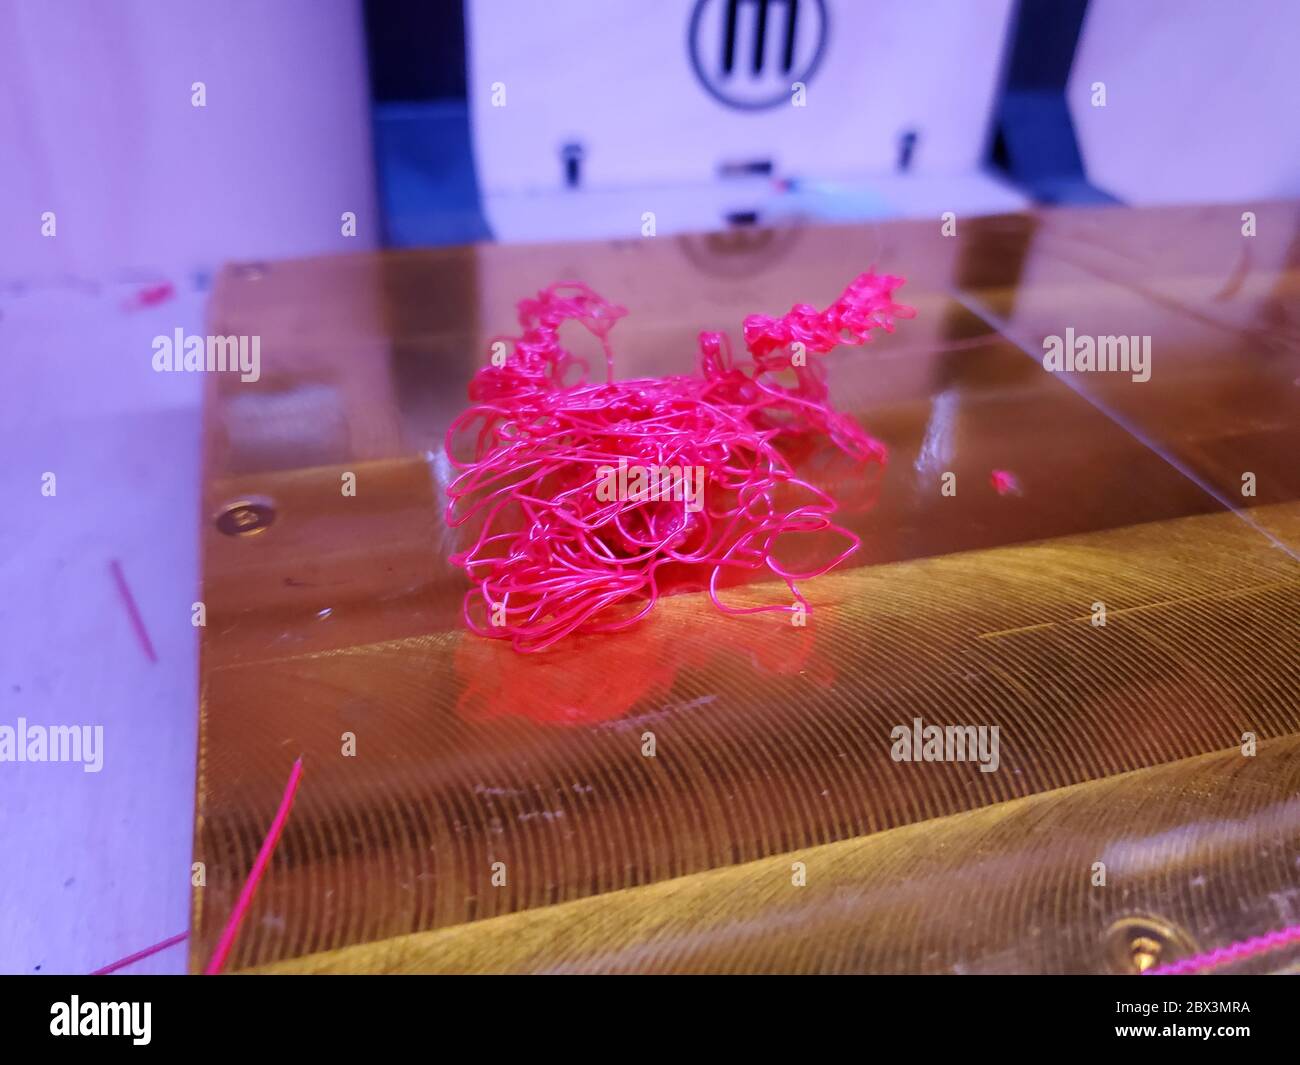 Red extruded filament on the build plate of a Makerbot 3D printer, San Ramon, California, April 20, 2020. () Stock Photo